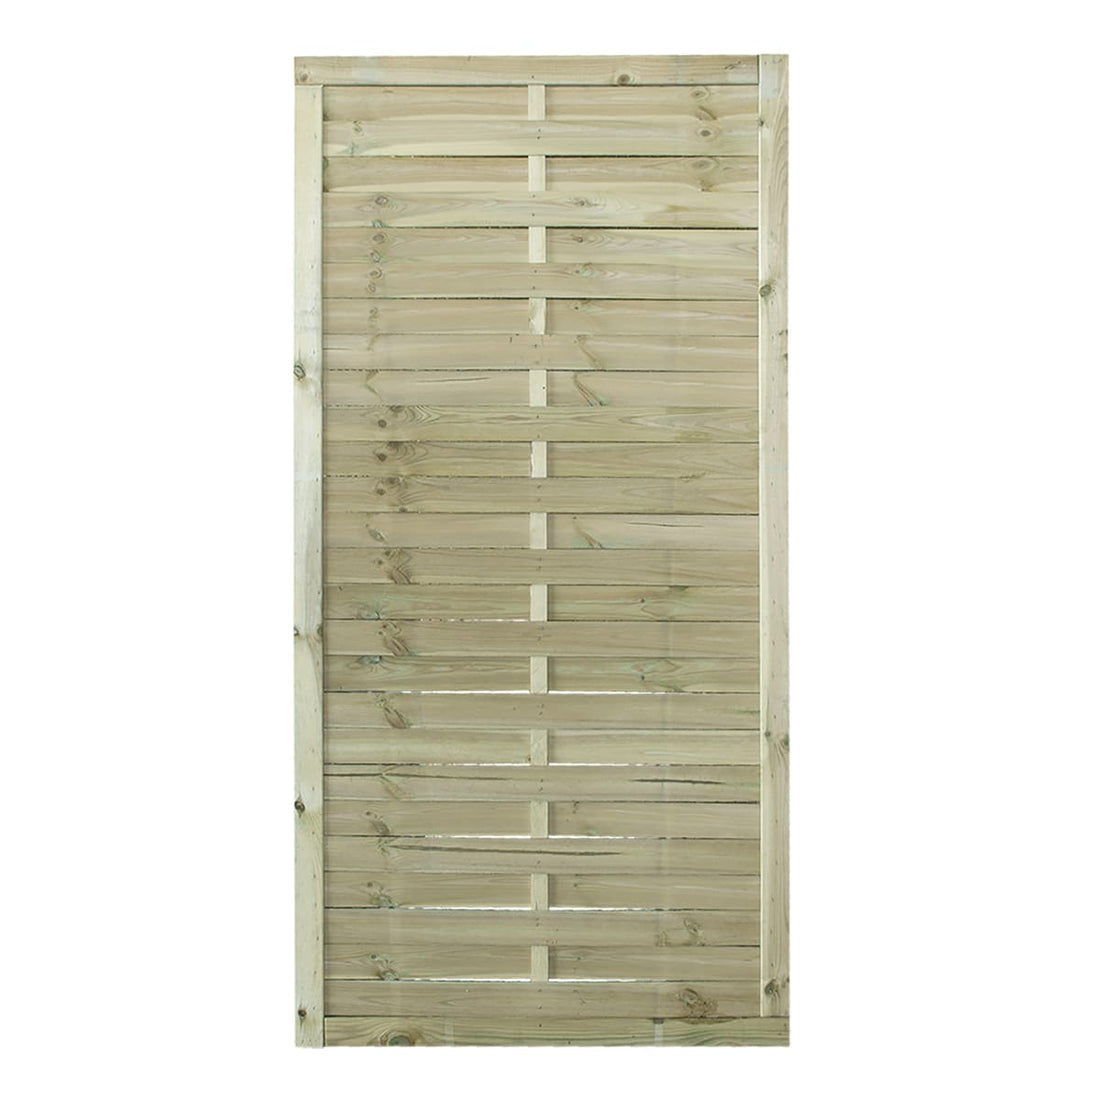 90X180 CM WOODEN FENCE IN AUTOCLAVE-TREATED PINE WOOD